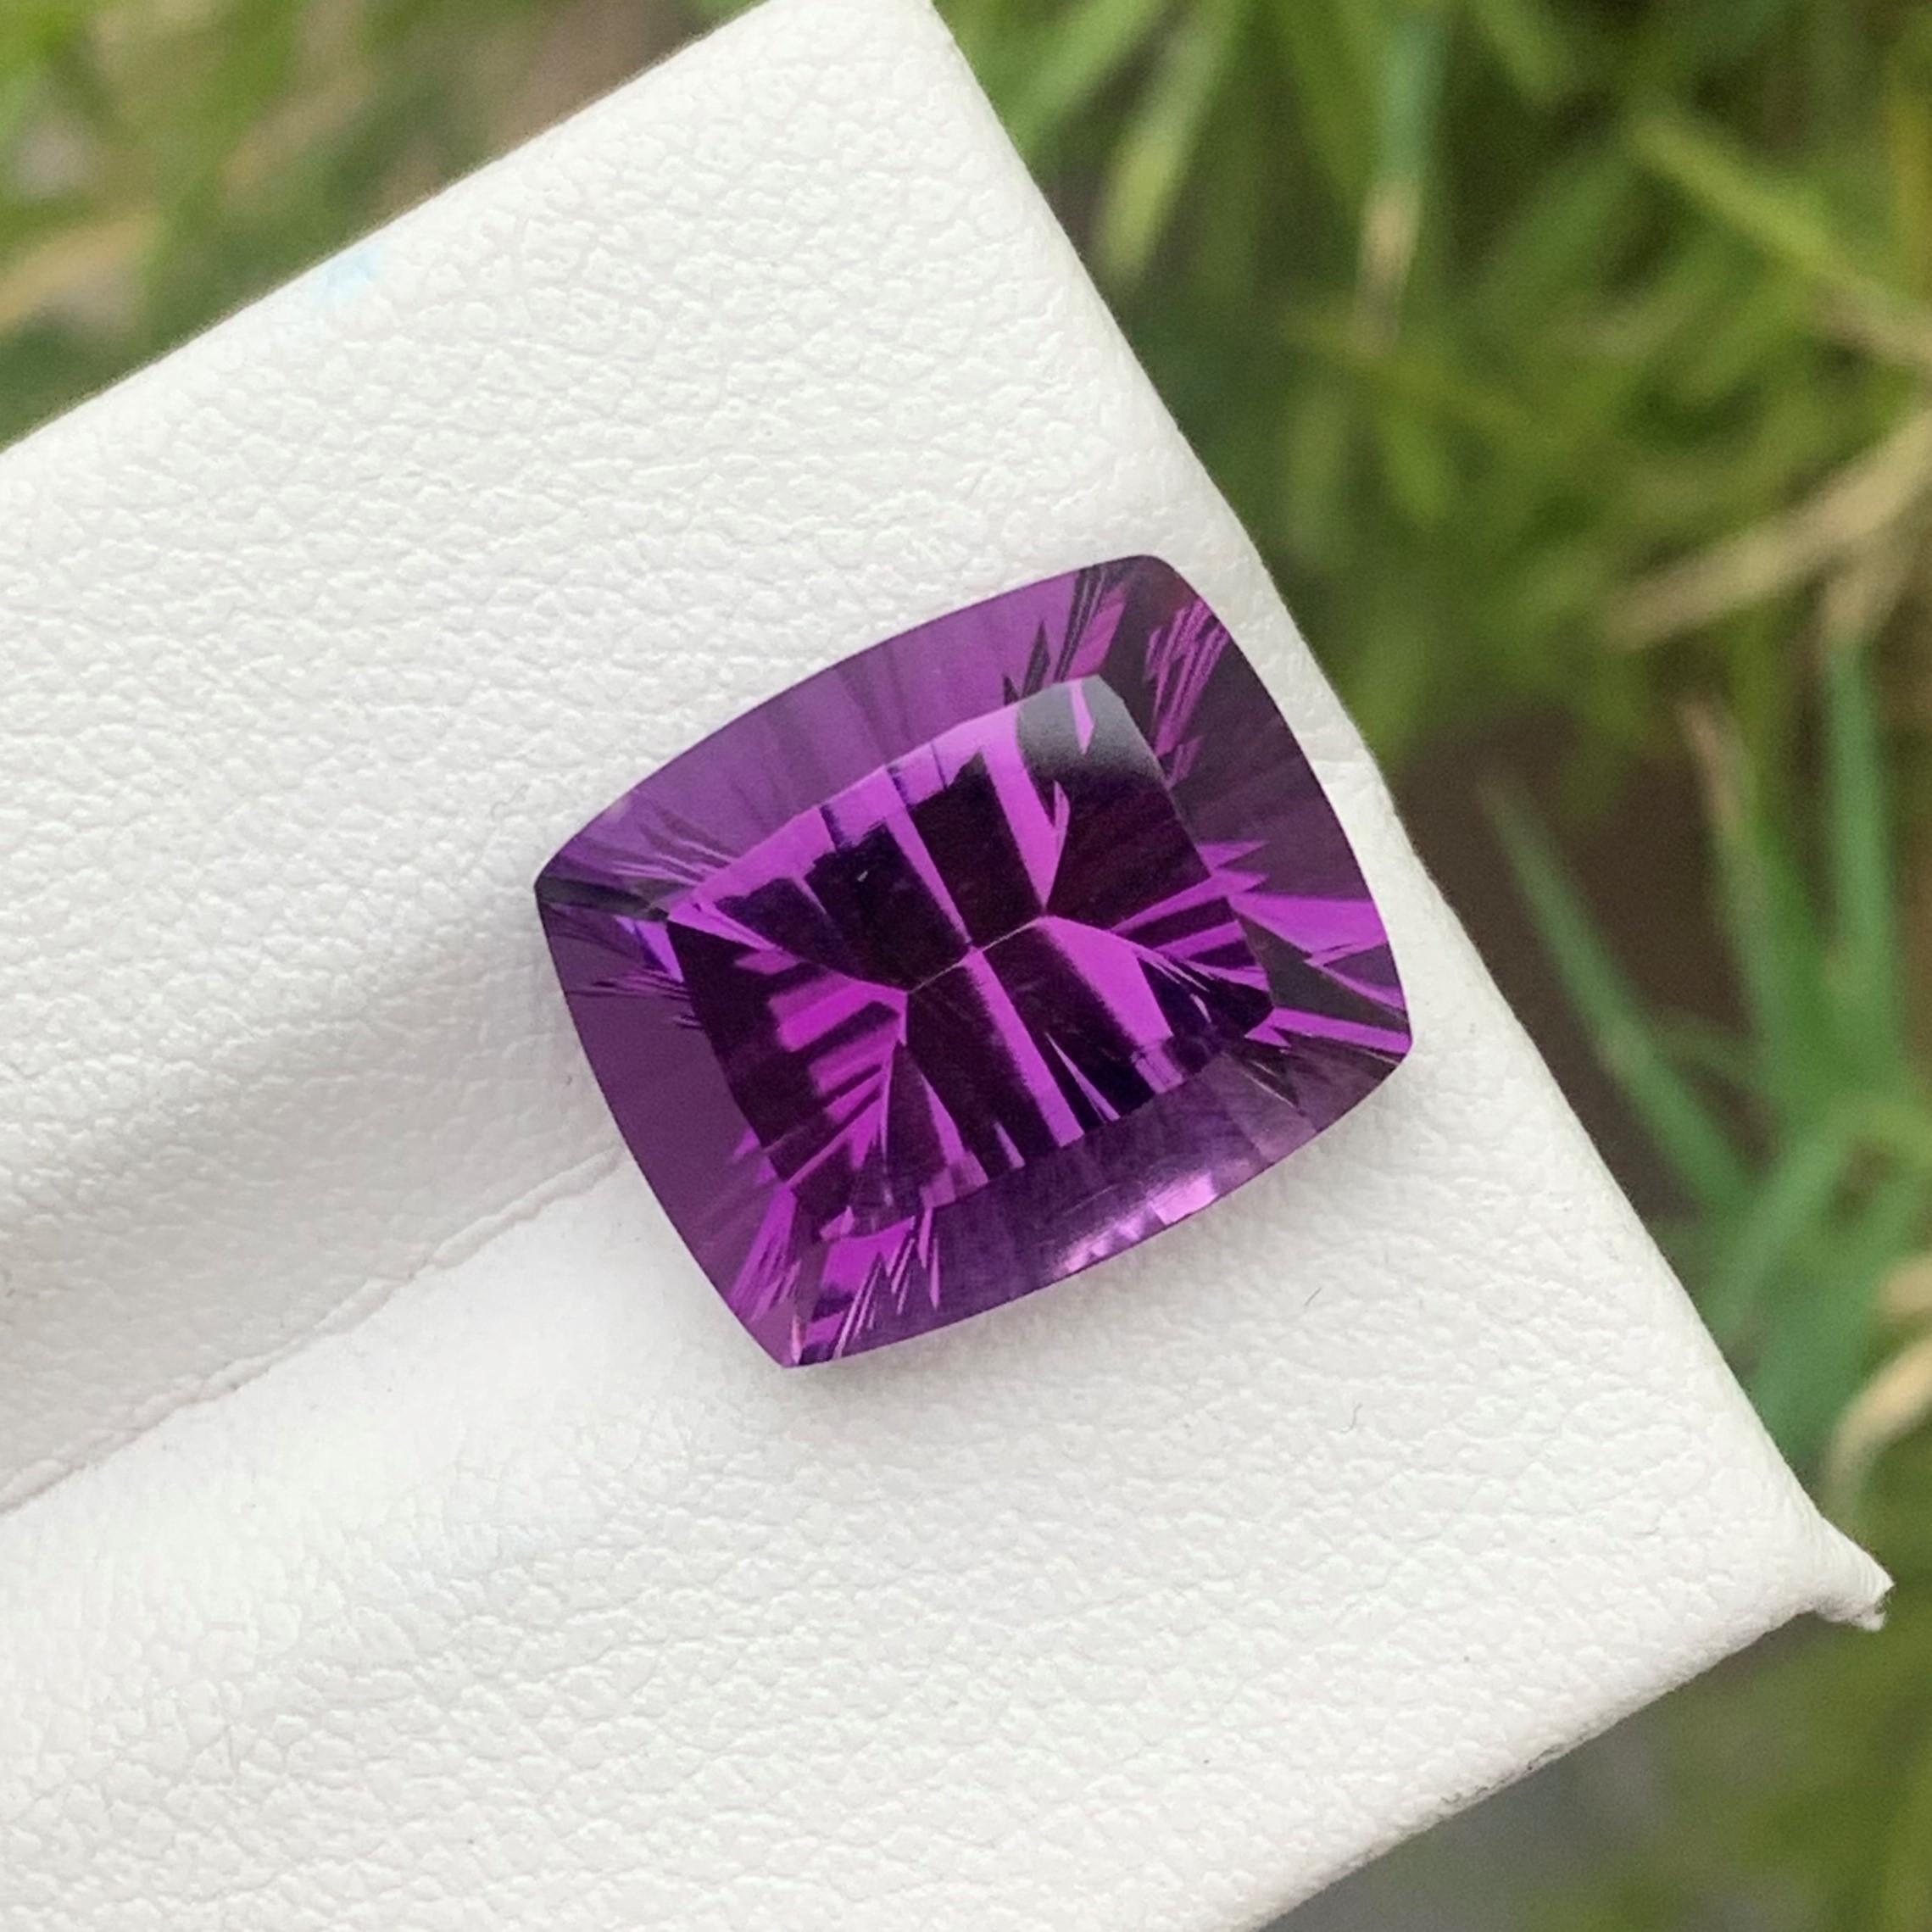 Gemstone Type : Amethyst
Weight : 7.45 Carats
Dimensions : 13.4x11.2x7.8 mm
Clarity : Loupe Clean
Origin : Brazil
Color: Purple
Shape: Can
Facet: Laser Cut
Certificate: On Demand
Month: February
Purported amethyst powers for healing
enhancing the